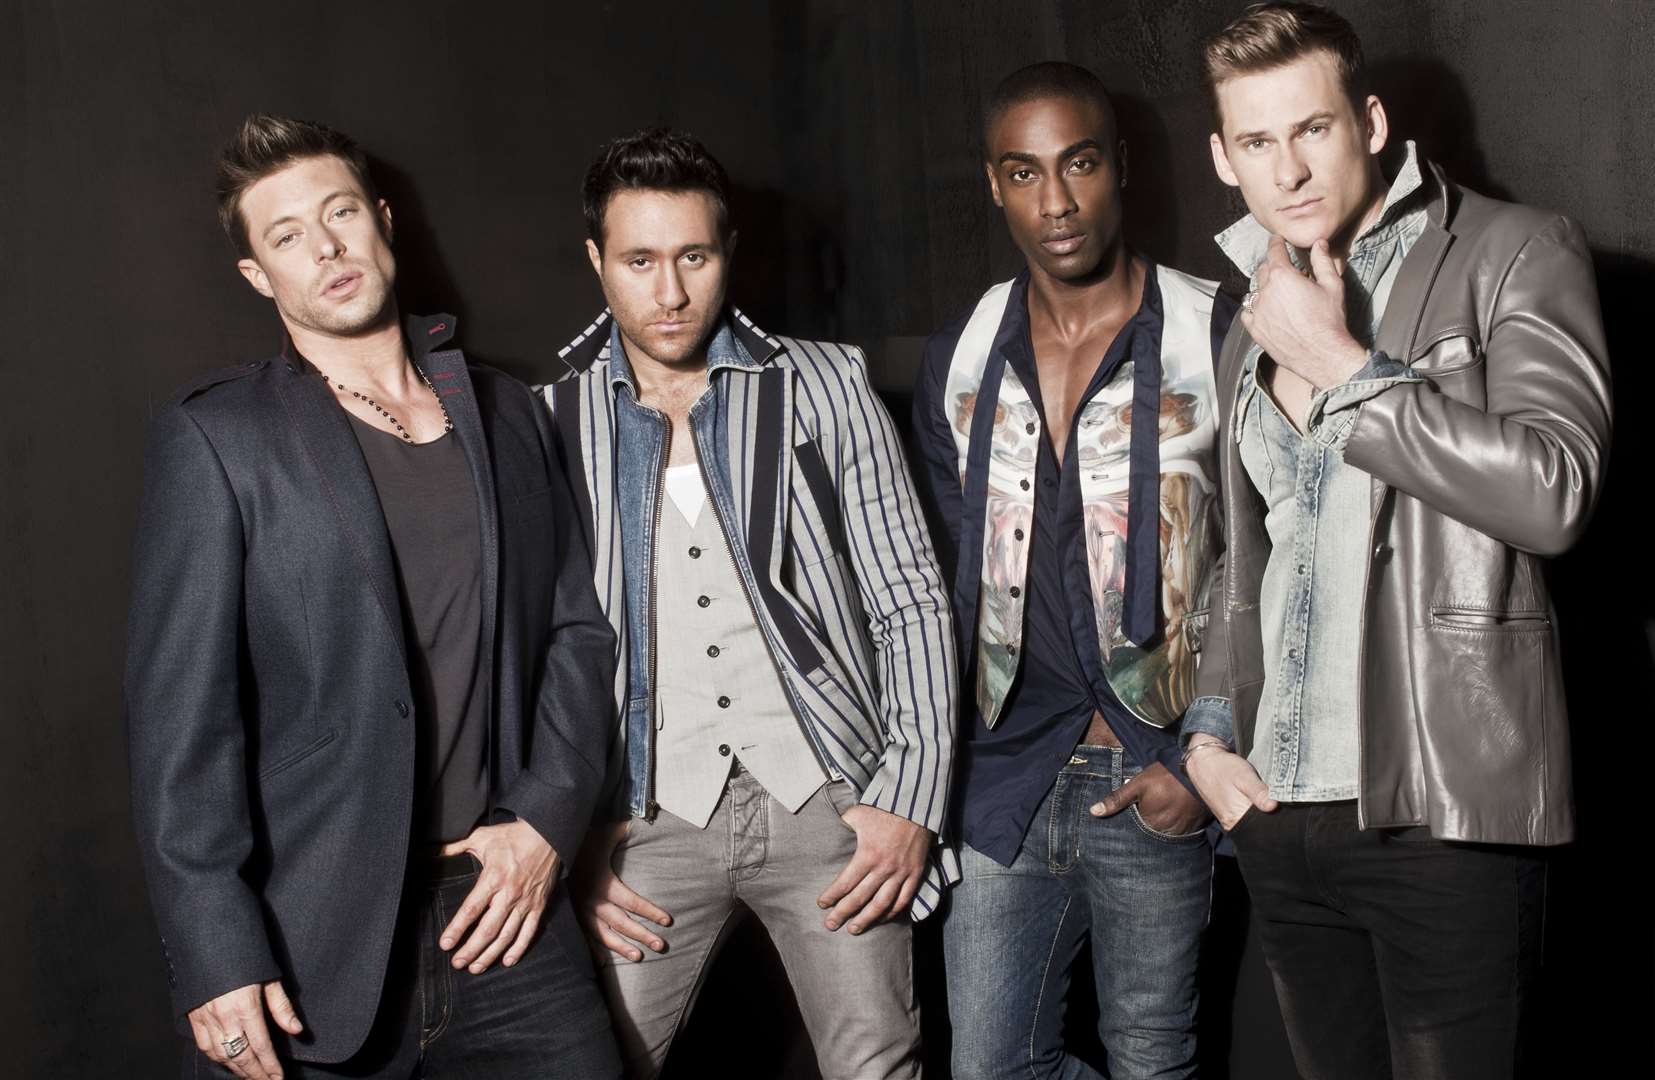 Blue, whose member Lee Ryan is from Chatham, were in the Eurovision Song Contest in 2011